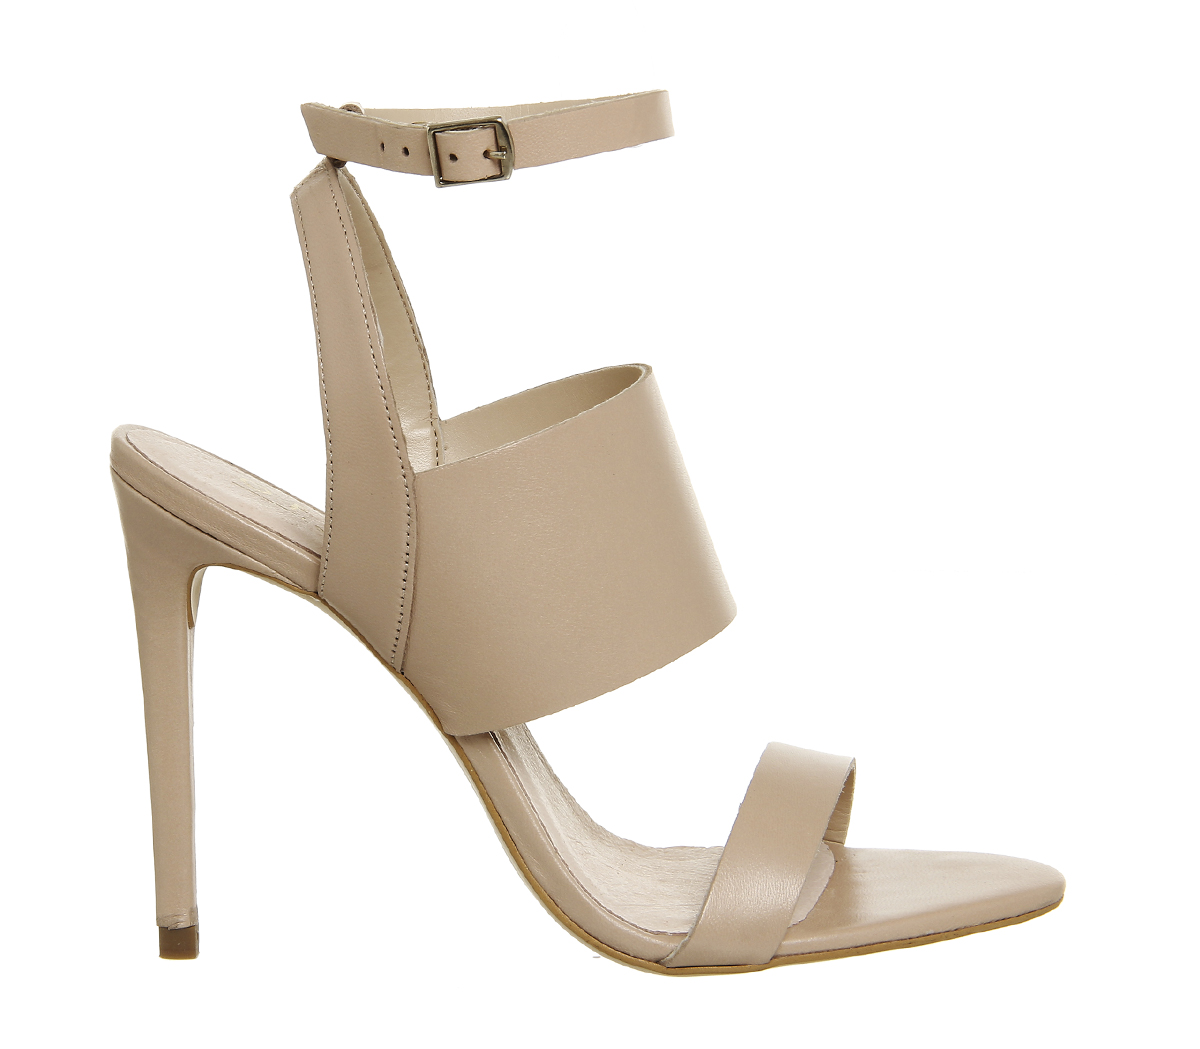 Office Anchor 3 Strap Heels Nude Leather - High Heels